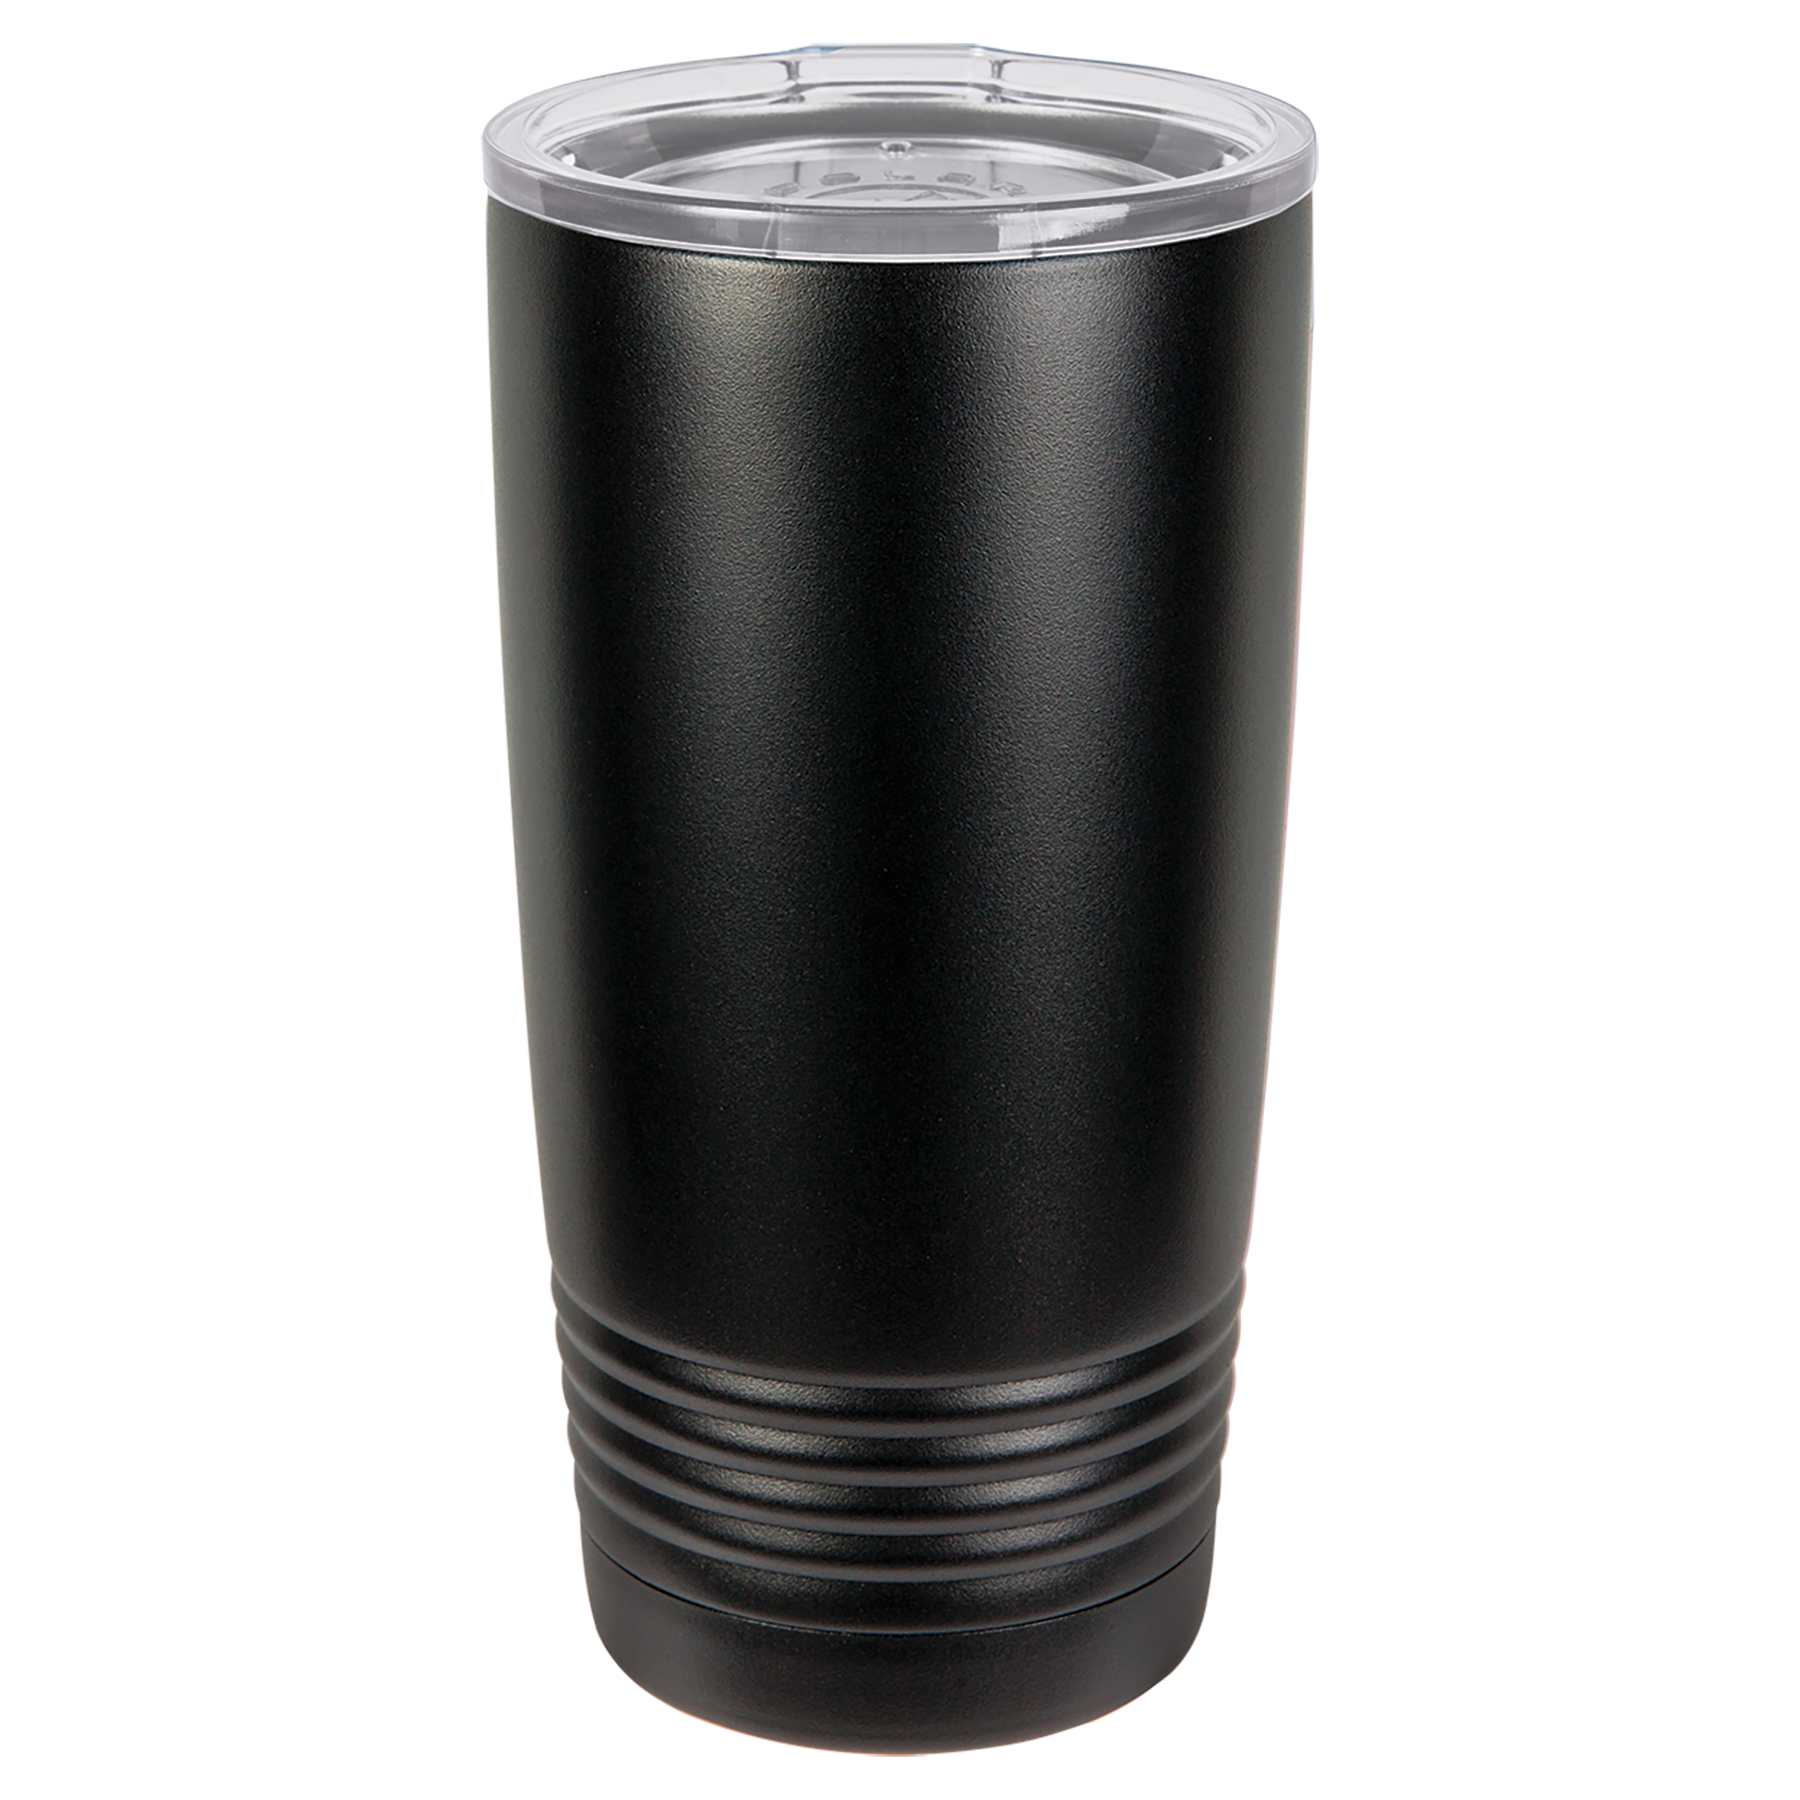 Engraved Solid Black 20oz Tumbler. double-wall vacuum insulation with slider lid 18/8 gauge stainless steel (18% chromium/8% nickel) - also known as Type 304 Food Grade. Dishwasher Safe. Personalize with your name or a custom saying. Great for Company Logo and Branding.